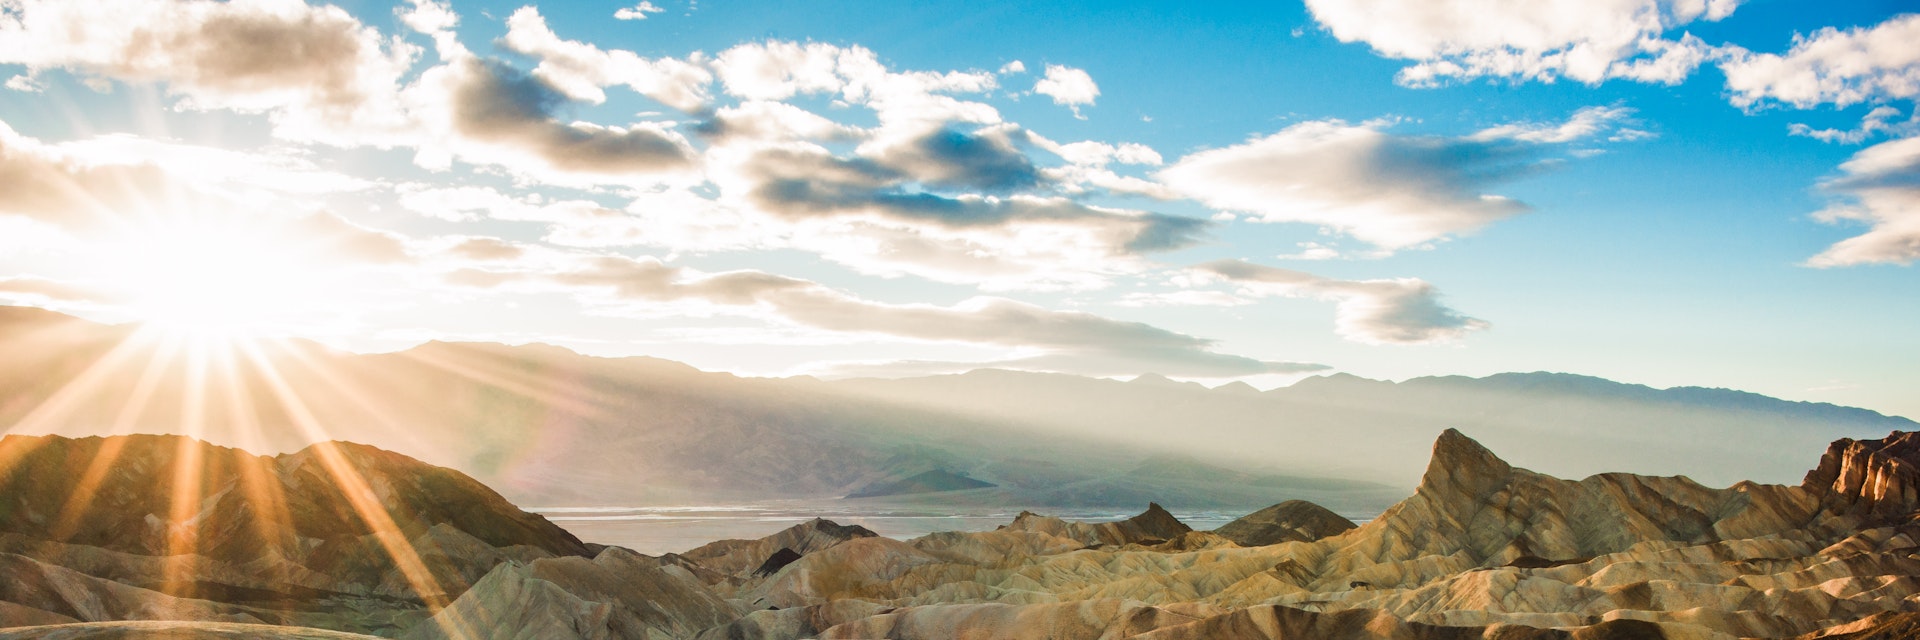 USA, California, Inyo County, Death Valley National Park, Zabriskie Point trail at sunset